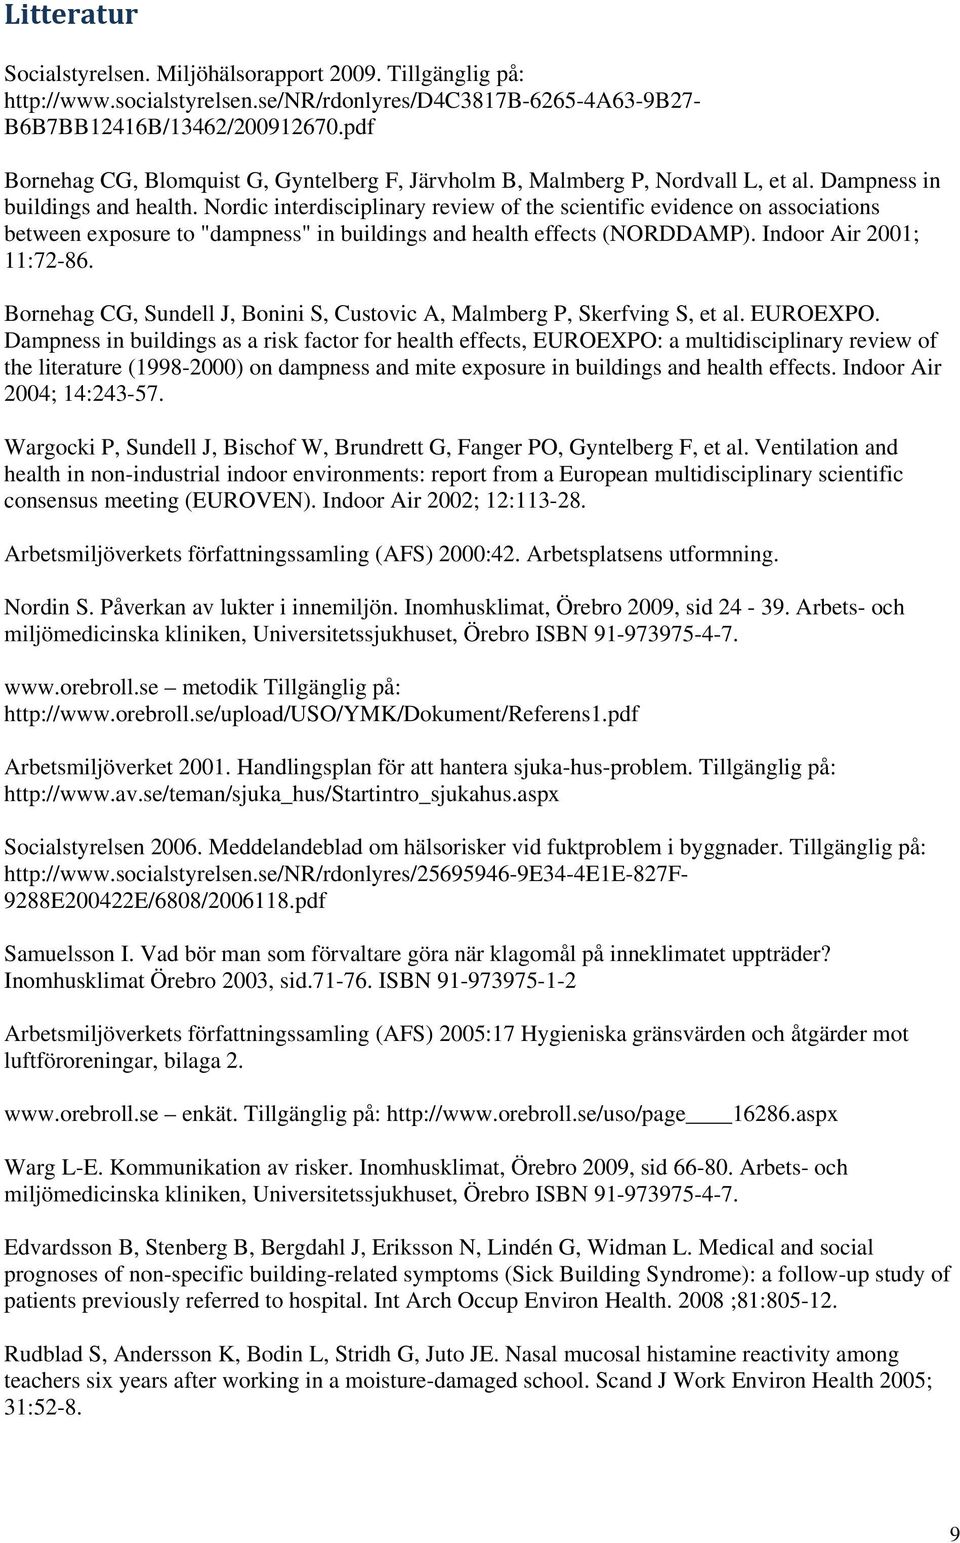 Nordic interdisciplinary review of the scientific evidence on associations between exposure to "dampness" in buildings and health effects (NORDDAMP). Indoor Air 2001; 11:72-86.